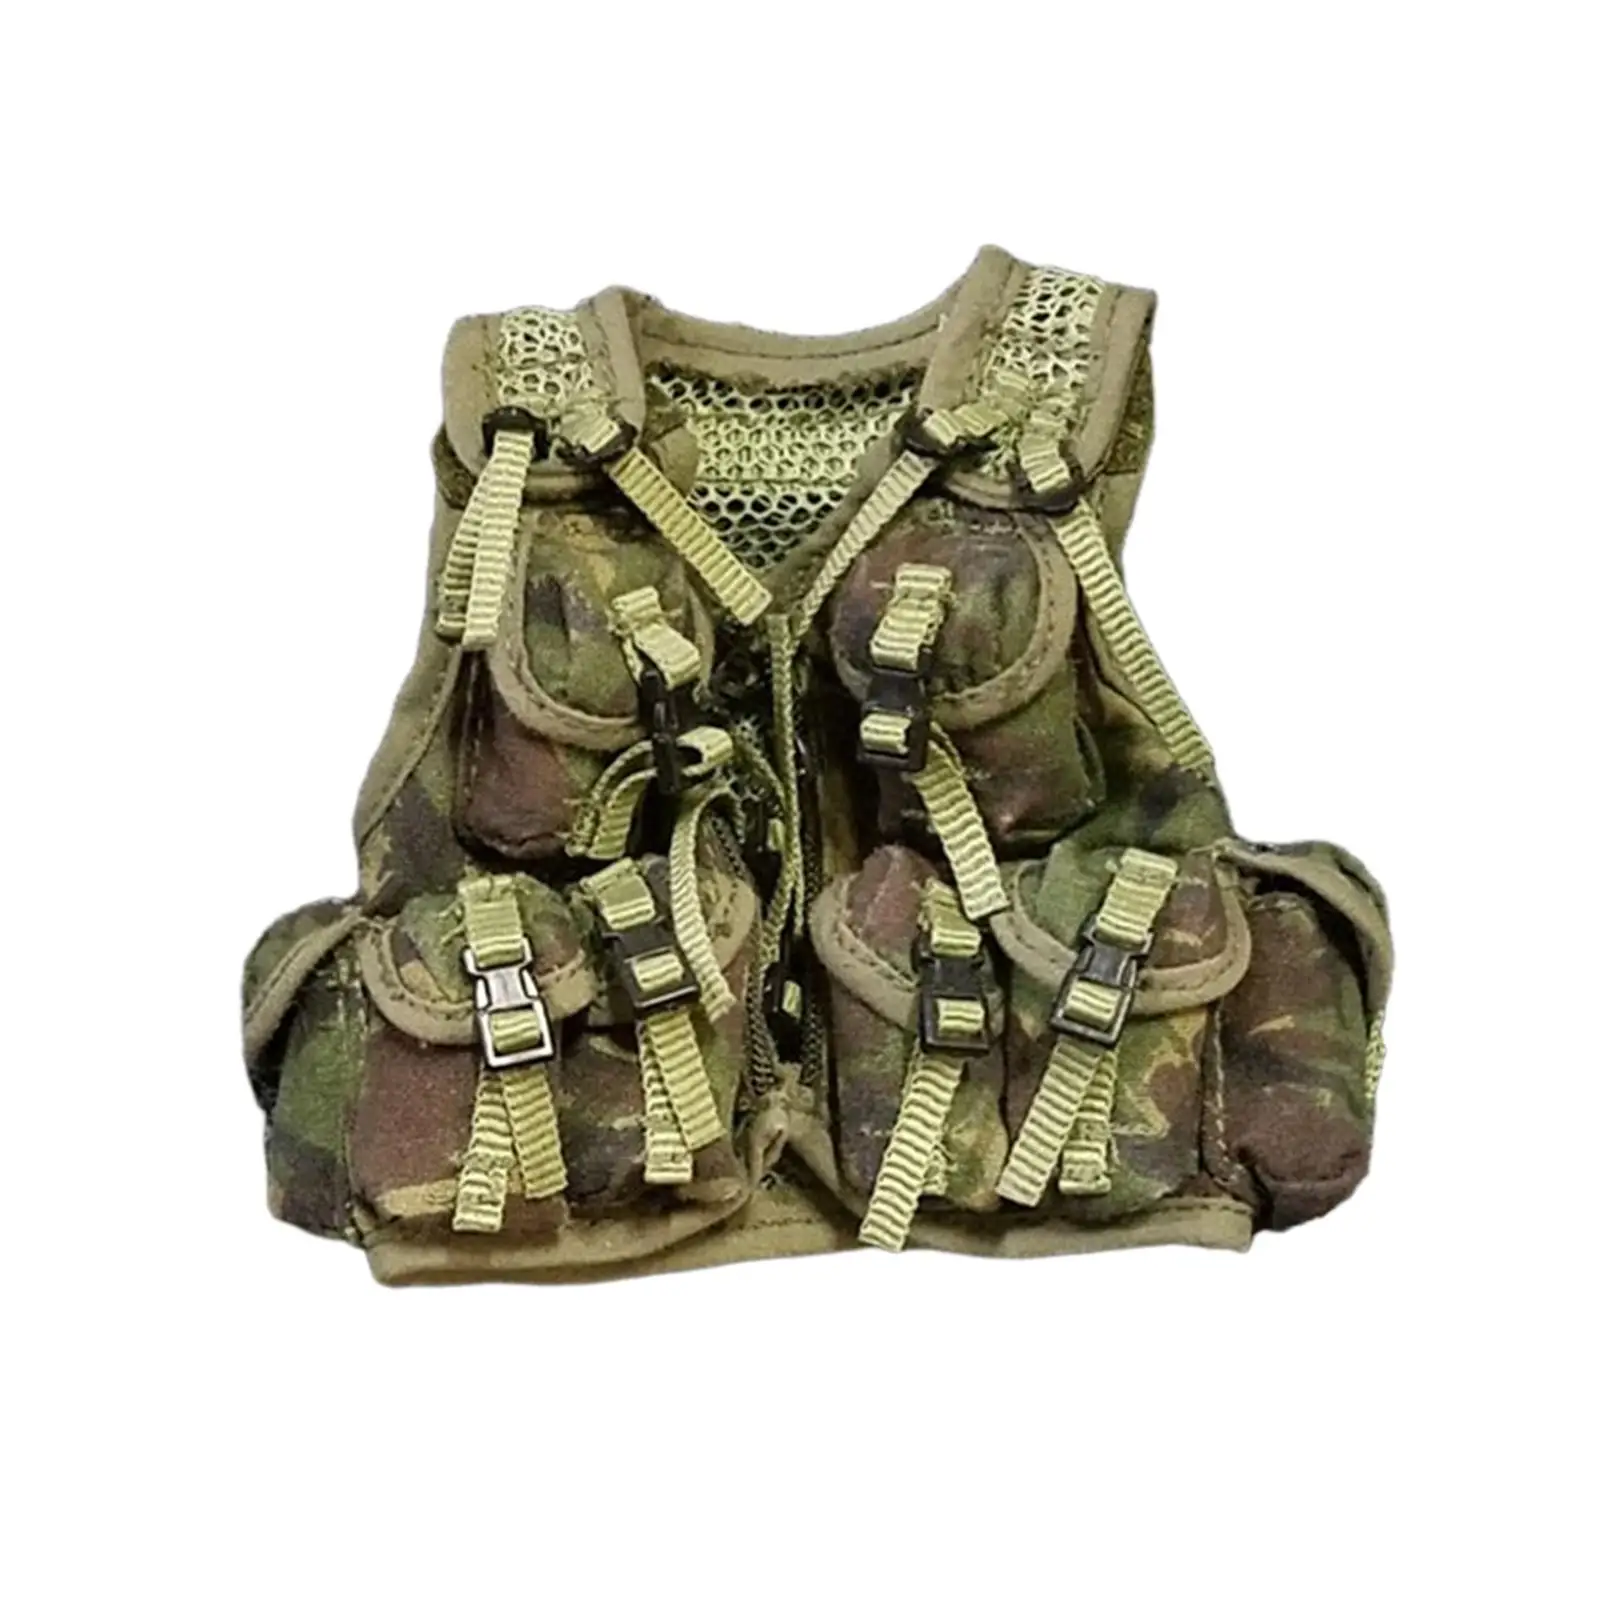 1/6 Scale Miniature Doll Jungle Vest with Multi Pockets Traning Vest Clothes for 12inch Male Collectable Action Figures Dress up